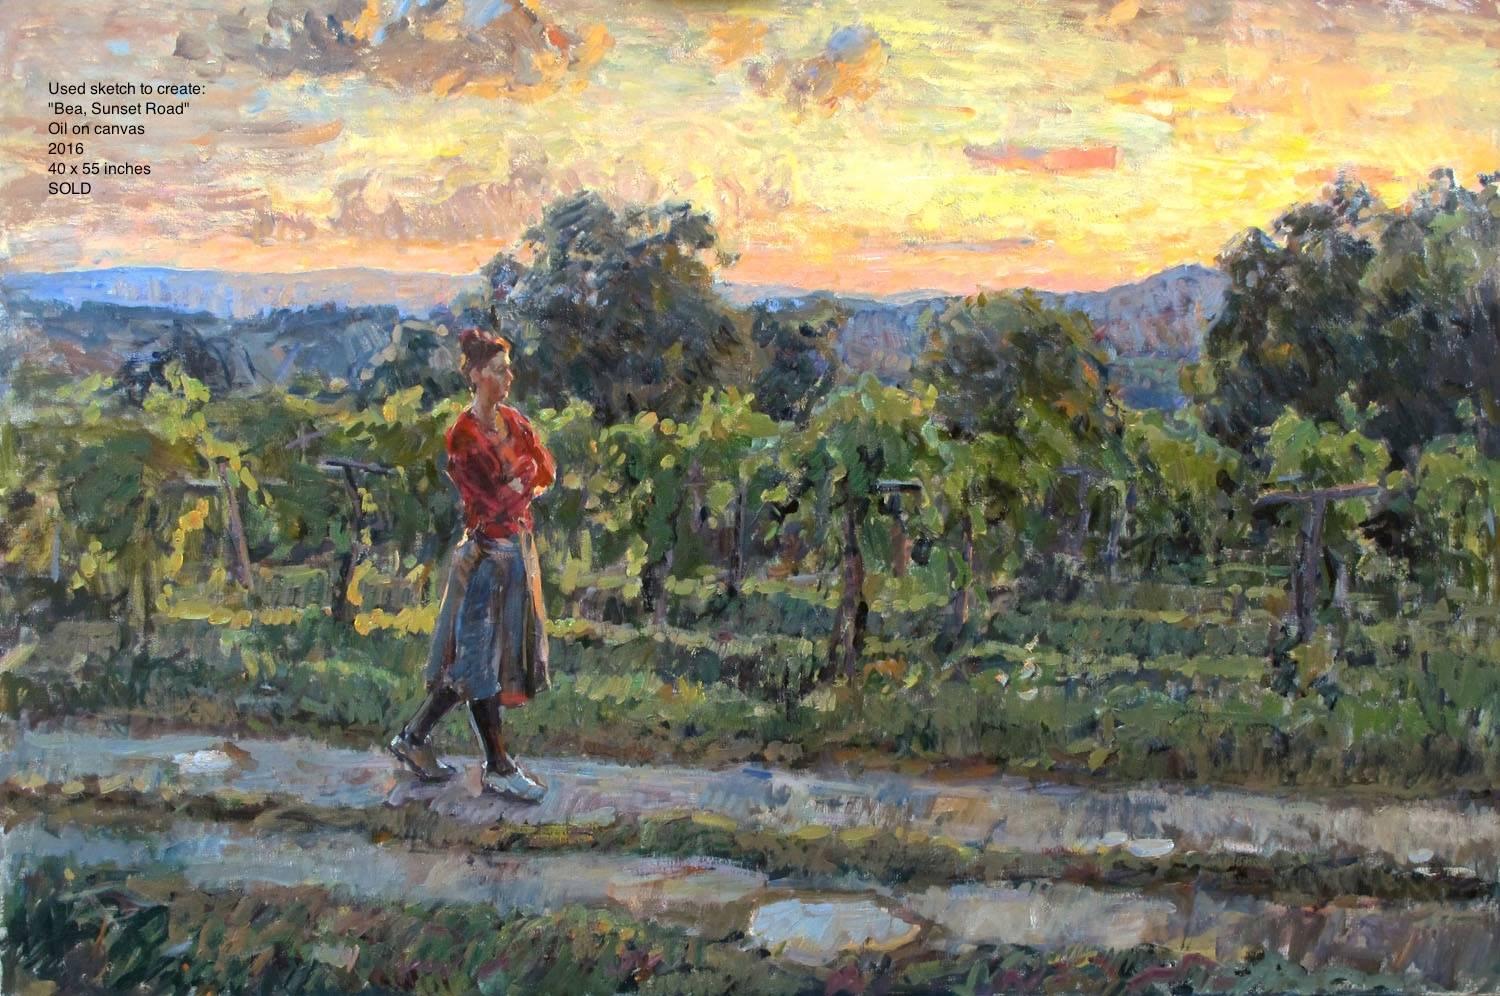 Bea, Sunset Road Sketch - American Impressionist Painting by Ben Fenske